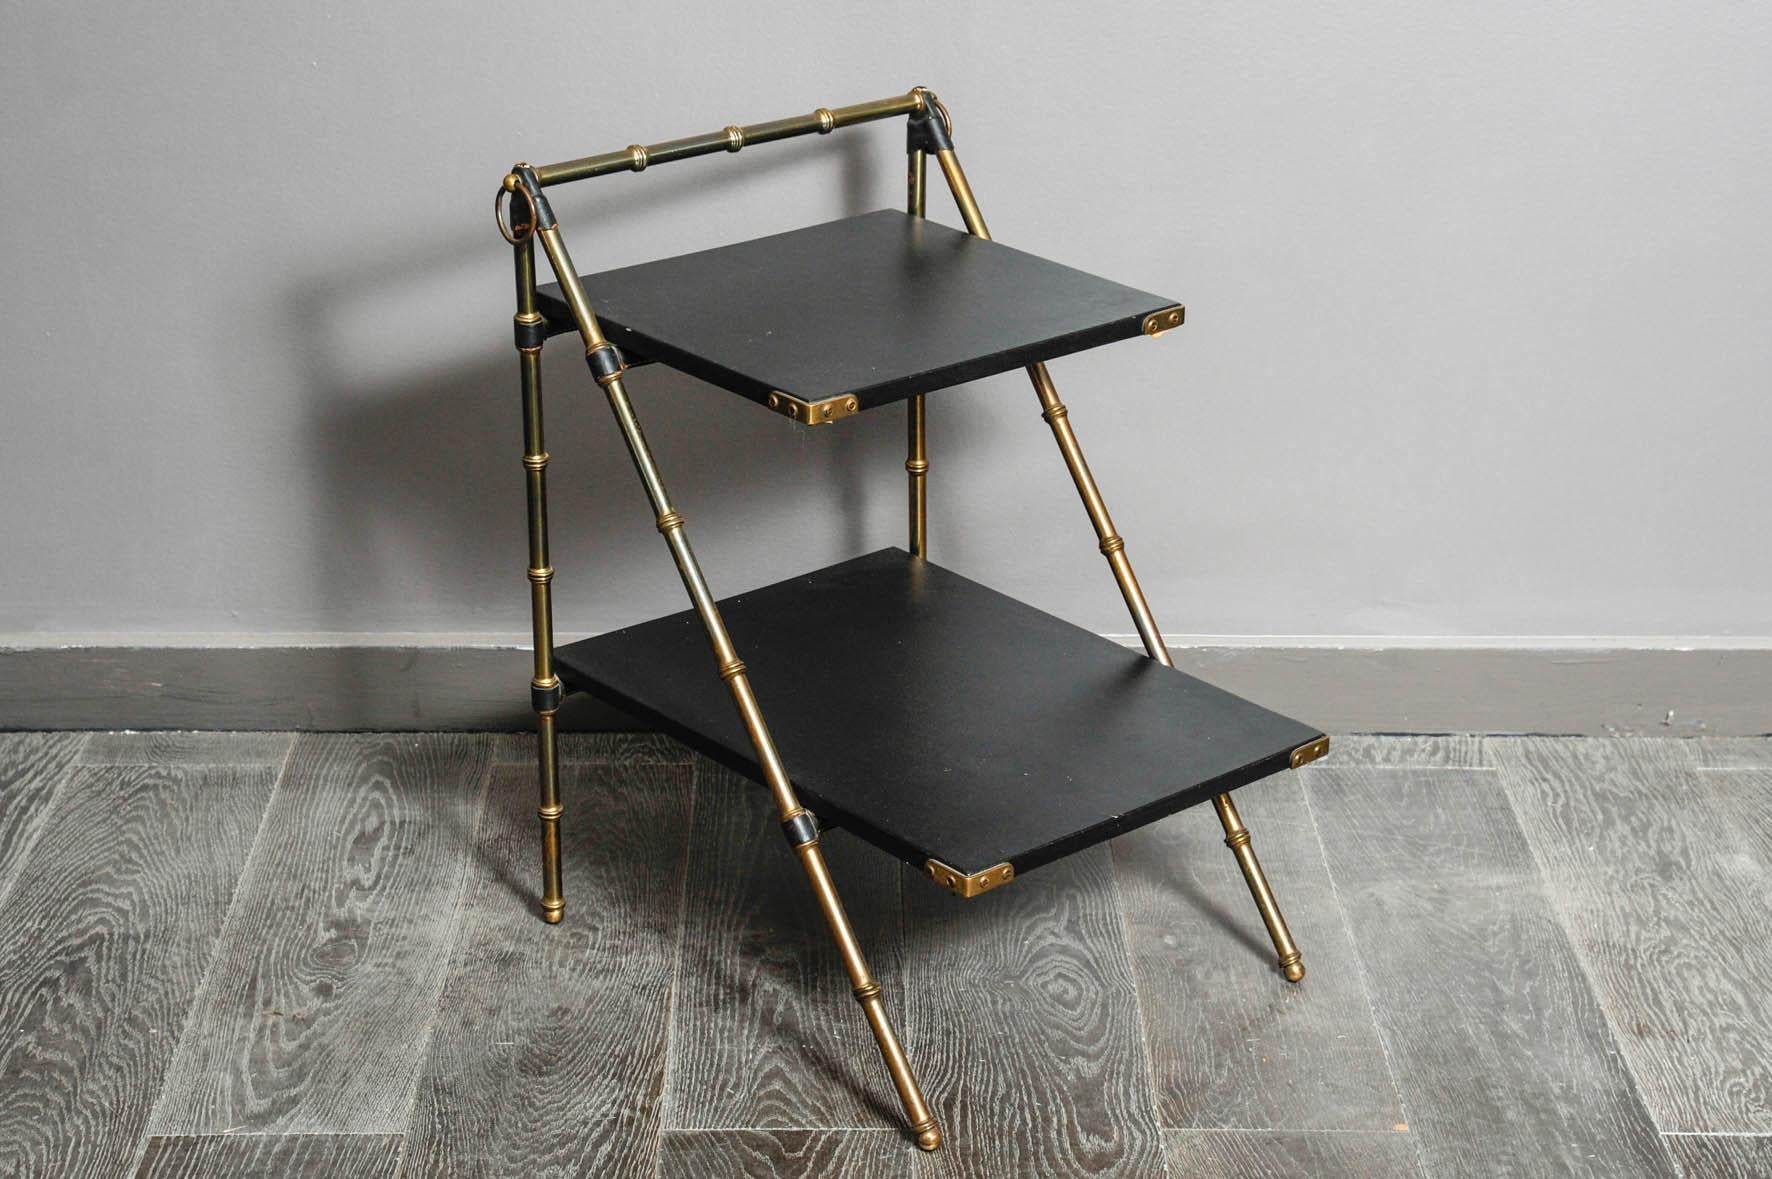 Fine telephone table by Adnet with leather and simulated leather in original condition.
Bamboo brass style,
circa 1960.
By Jansen, Similar model in 